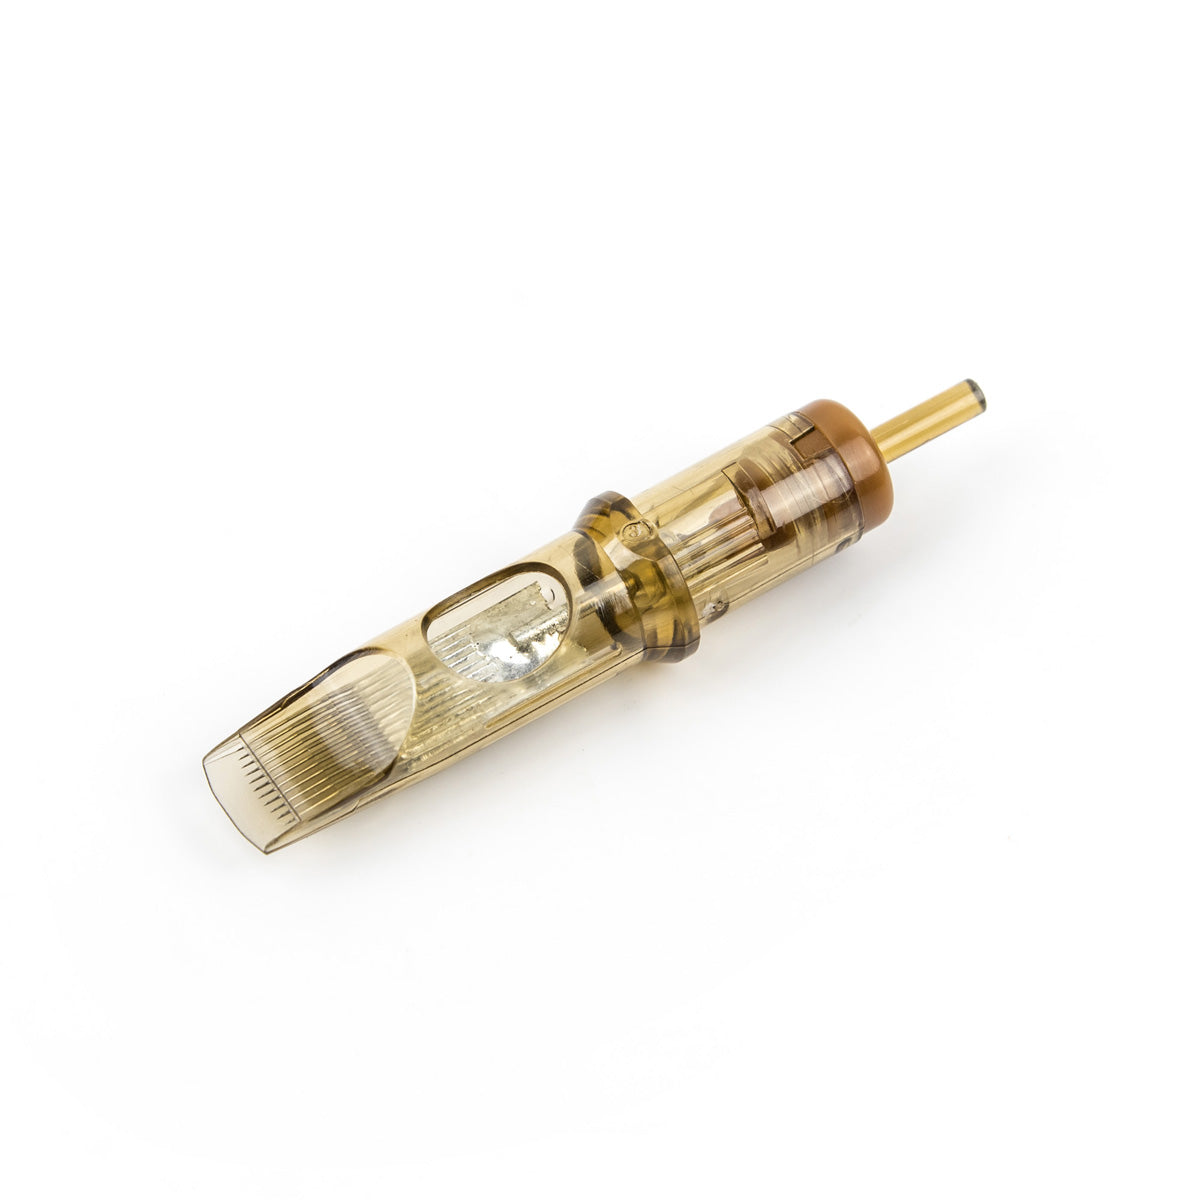 Kwadron Tattoo Cartridges -  Curved Magnum Long Taper